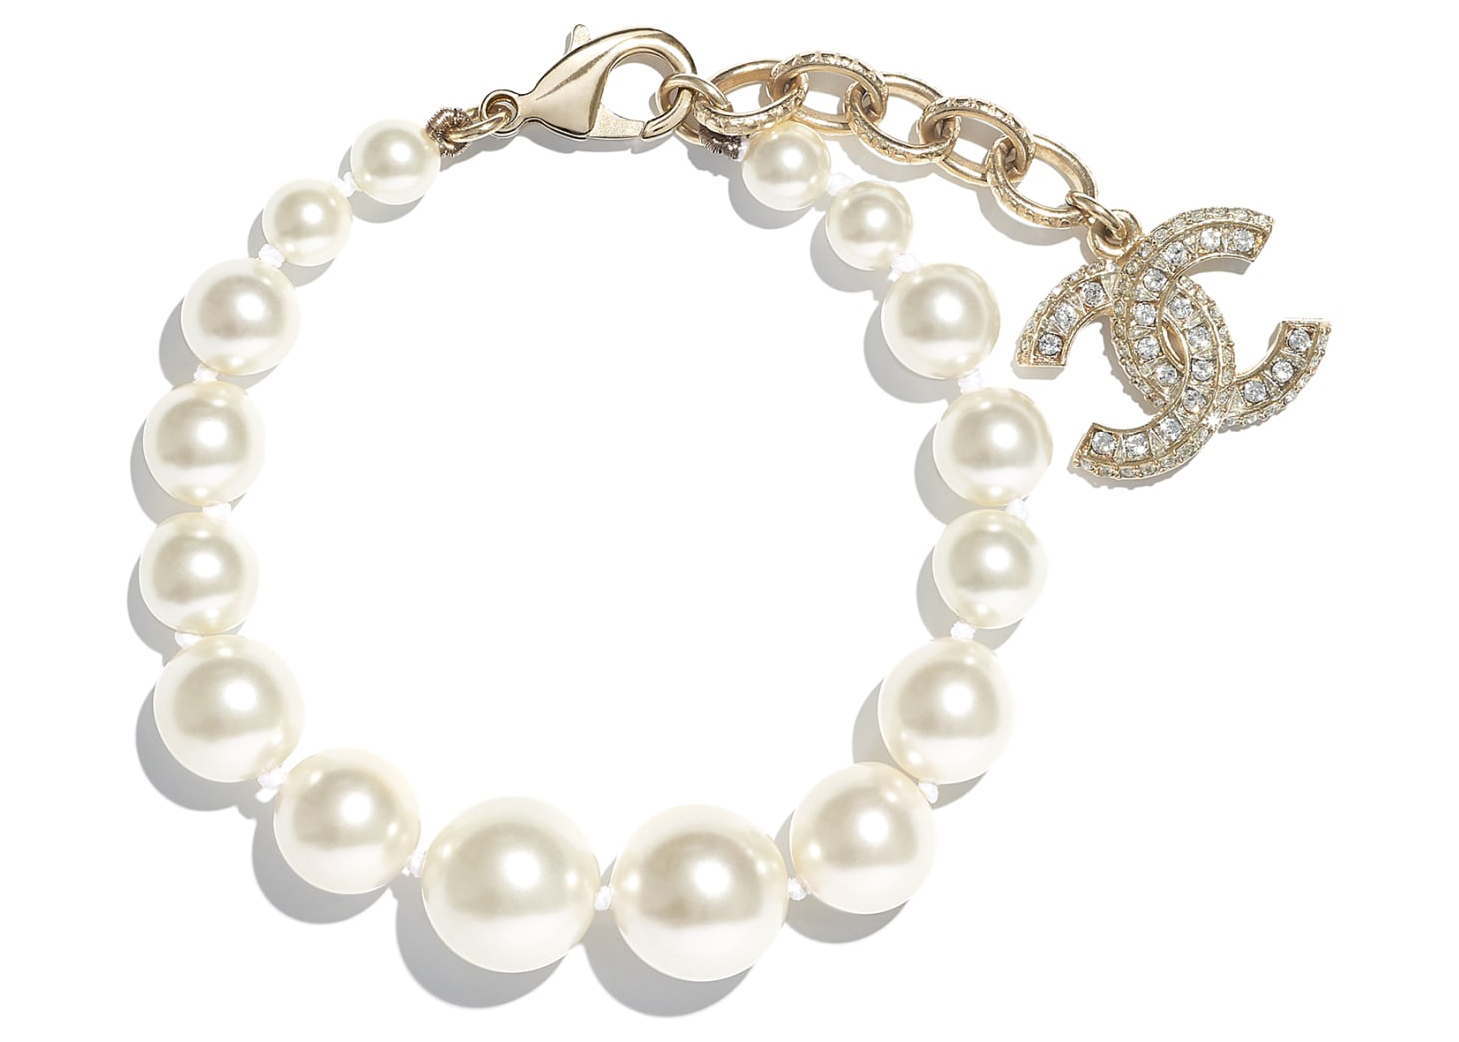 Chanel Vintage Textured CC Logo Faux Pearl Bracelet  Rent Chanel jewelry  for 45month